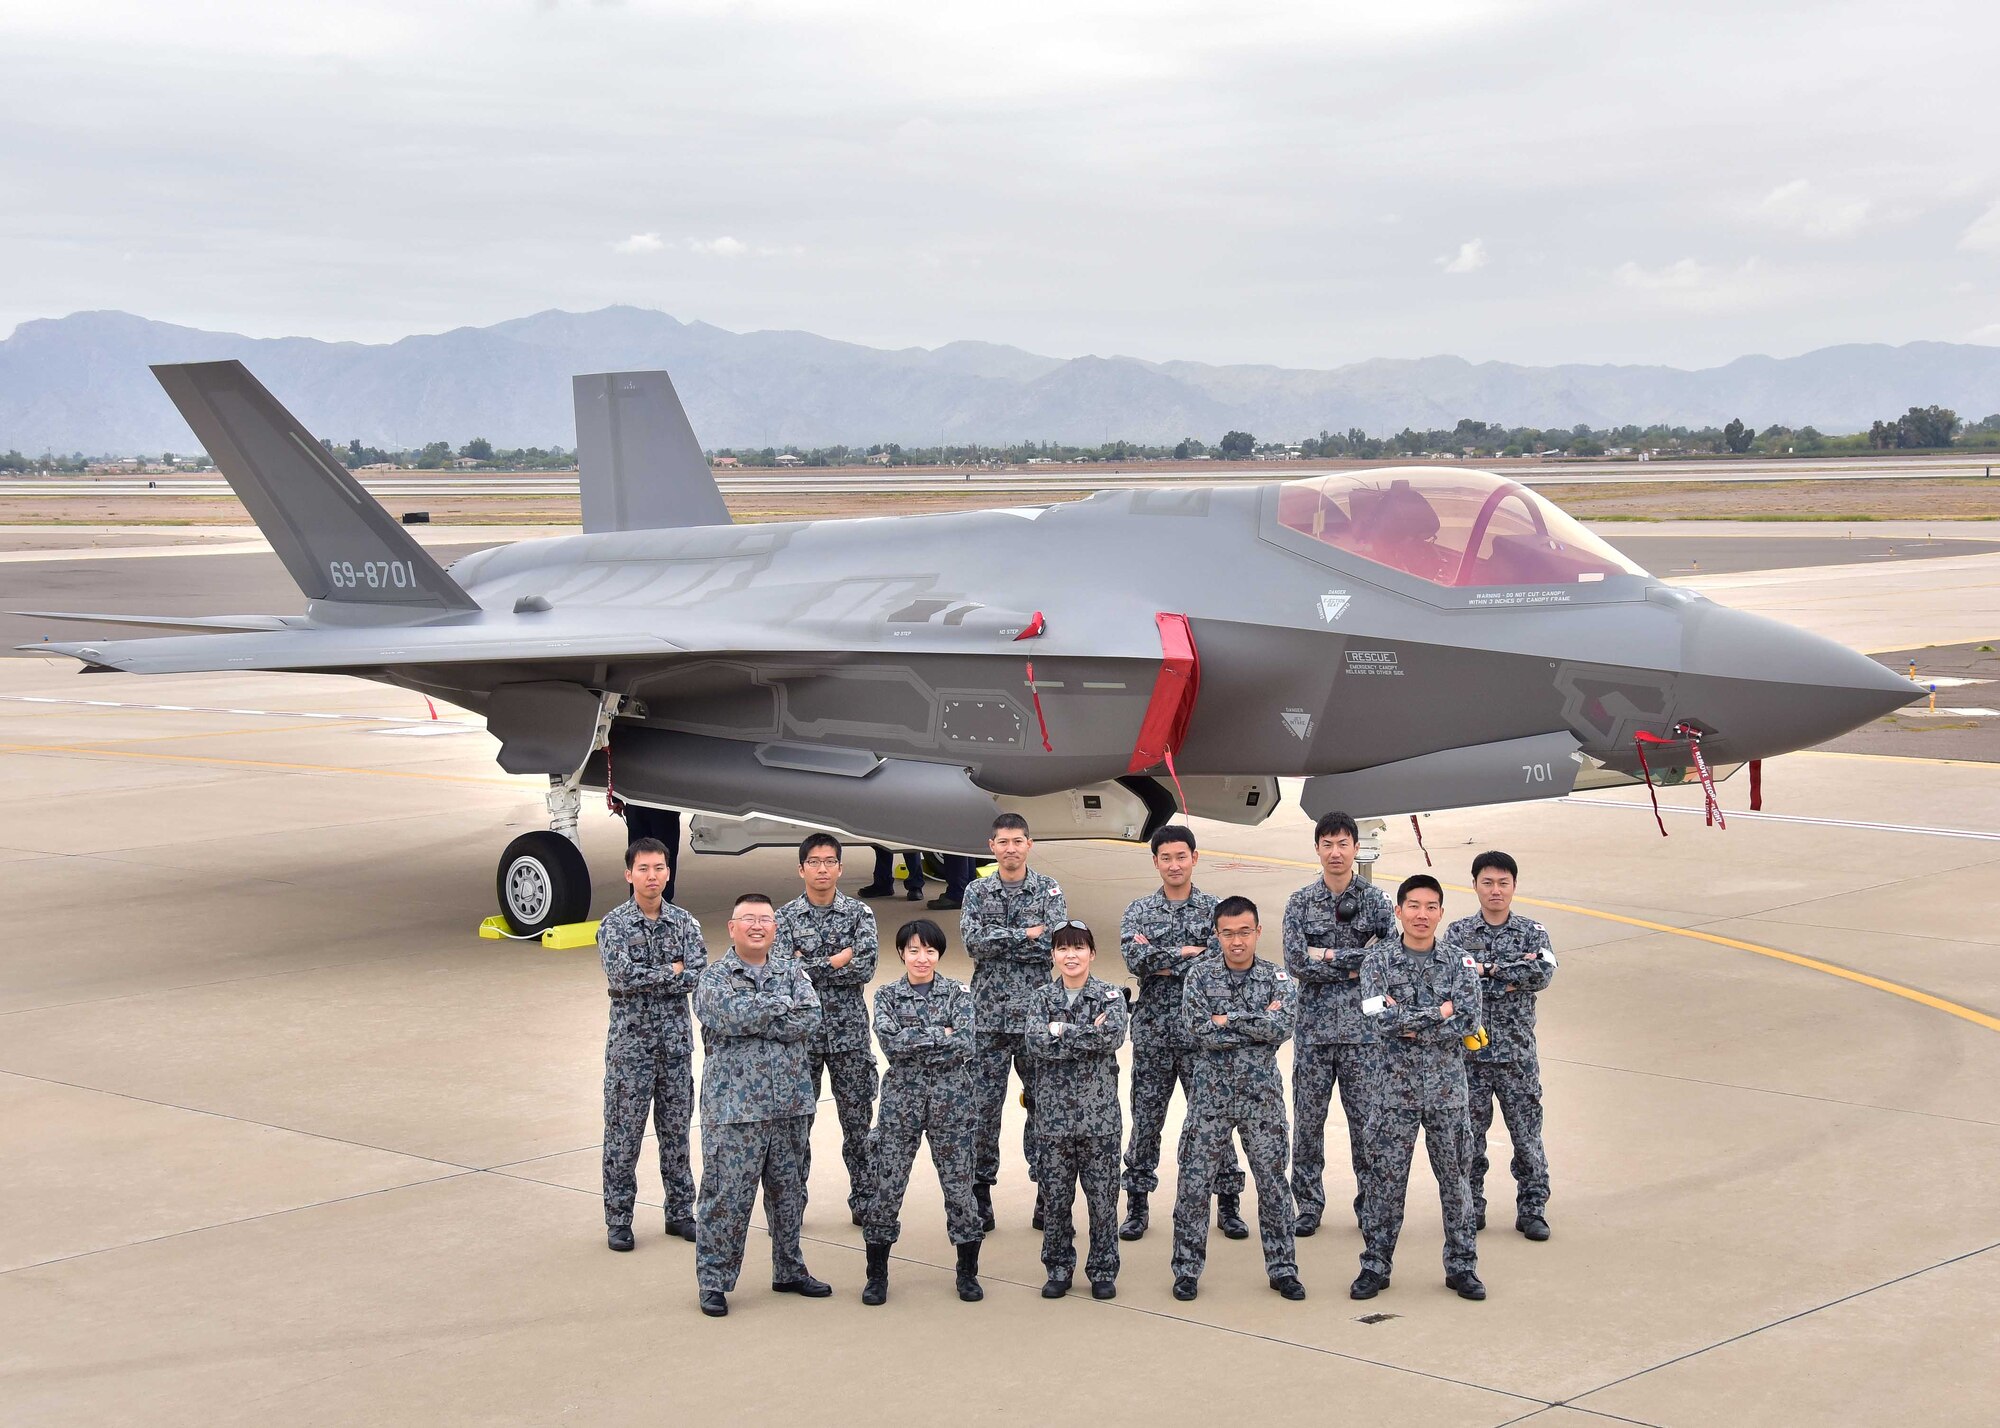 The Japanese Air Self-Defense Force maintainers pose for a photo Nov. 28 during the arrival of the first Japanese F-35A at Luke Air Force Base Ariz. (U.S. Air Force photo by Tech. Sgt. Louis Vega Jr.)